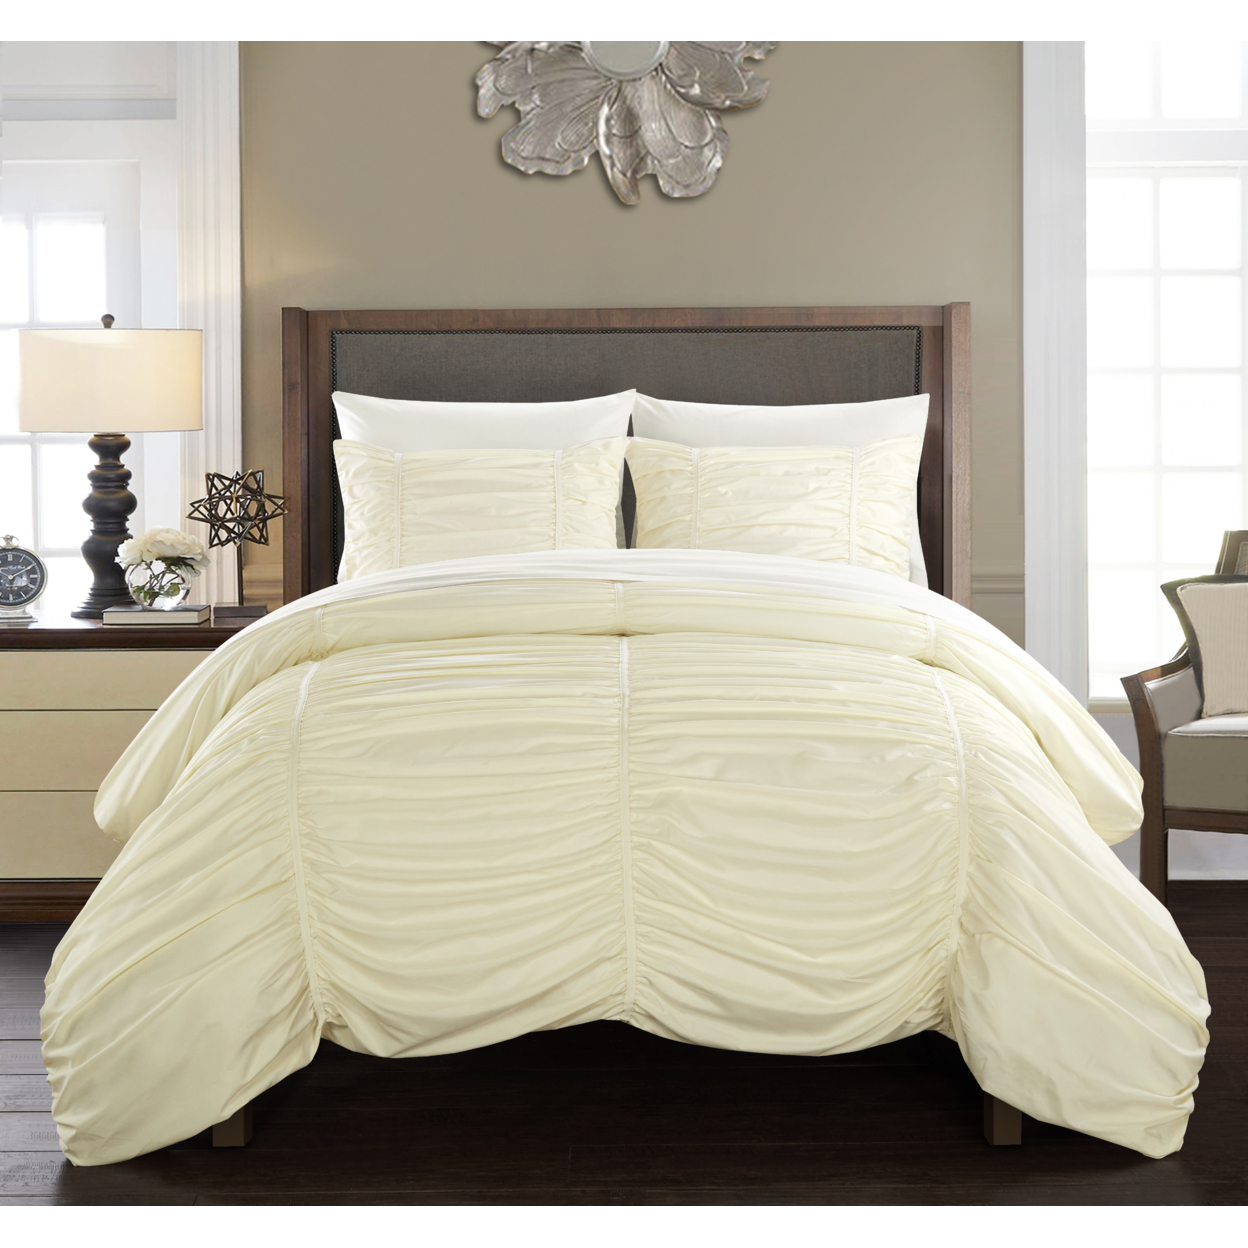 Kiela 2 Pc Or 3 Pc Ruched Comforter Set - White, Queen